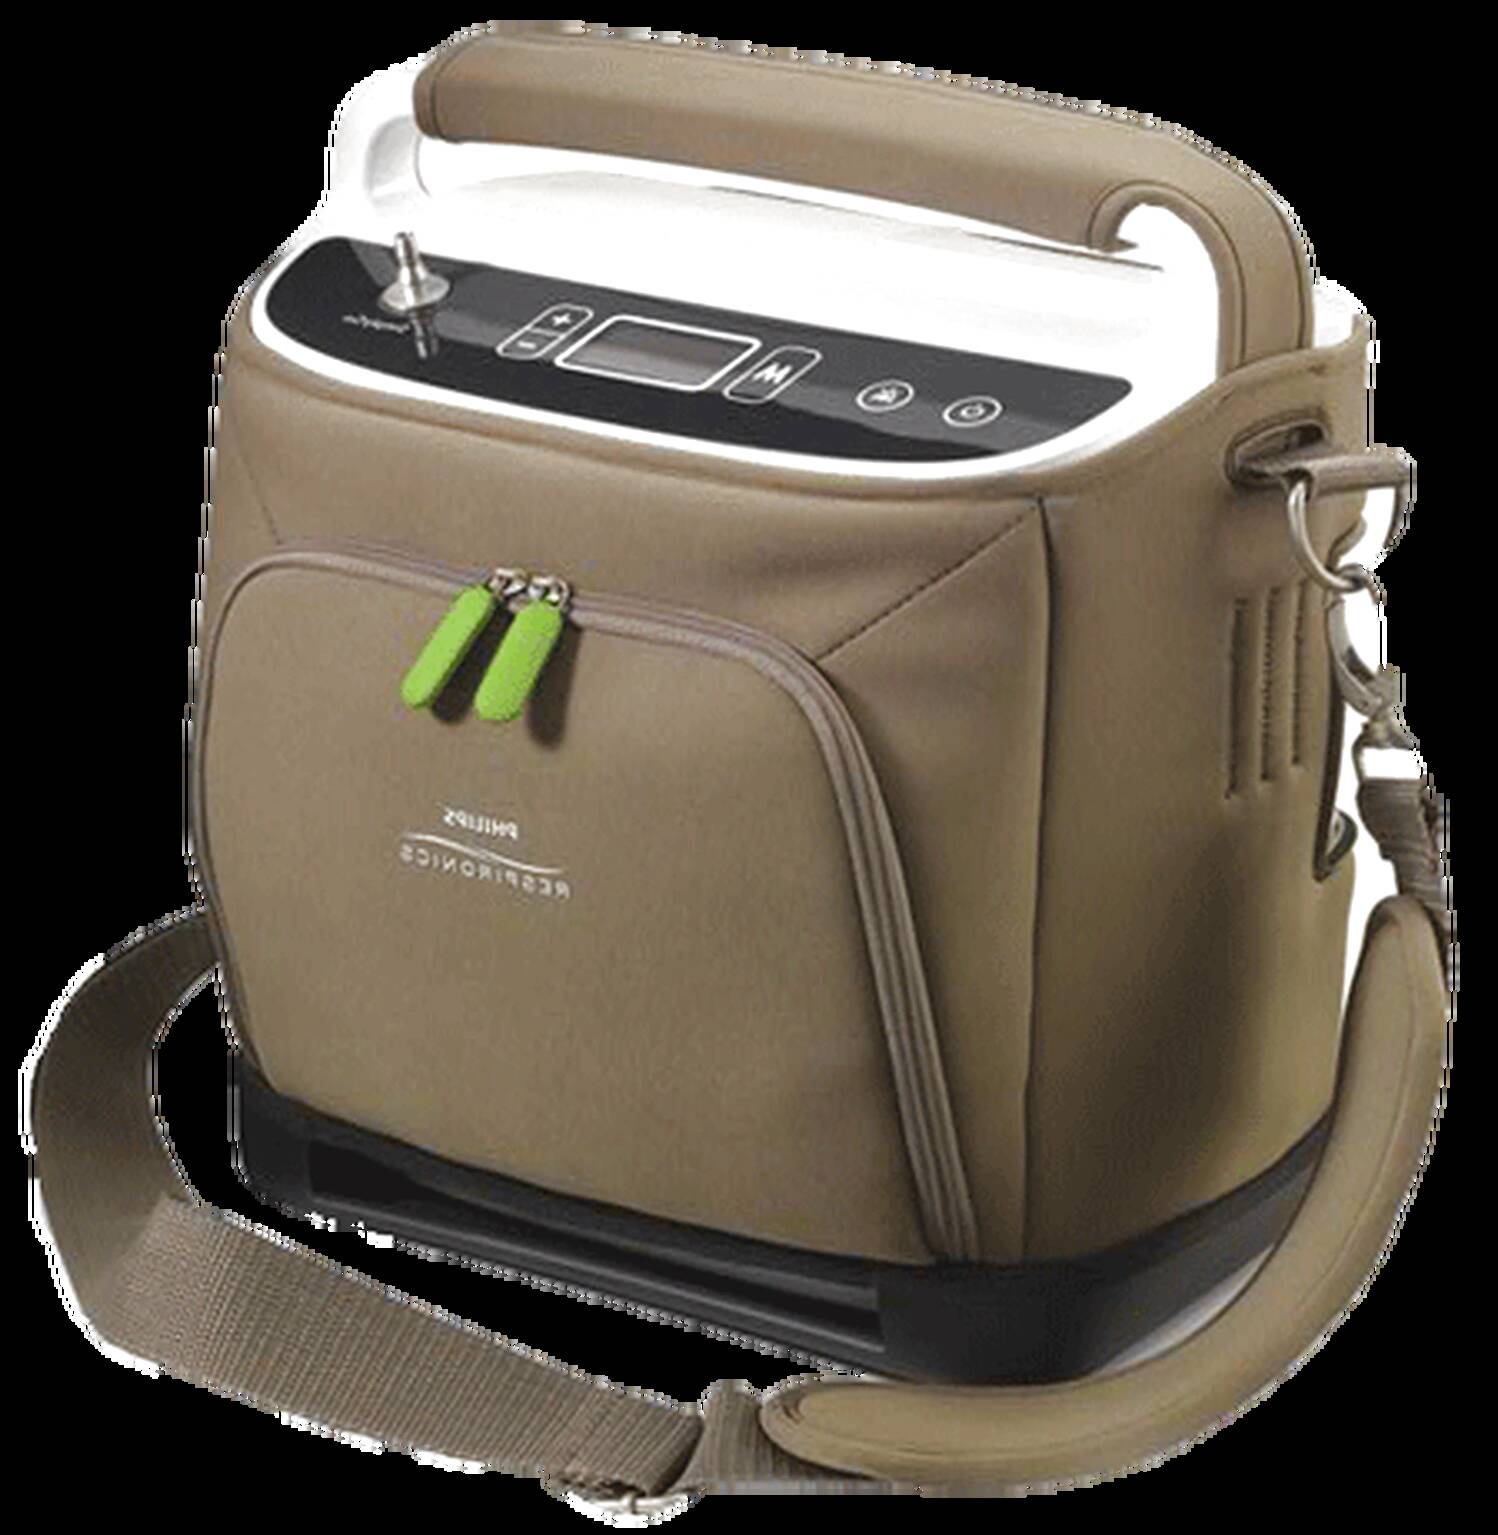 Portable Oxygen Concentrator for sale in UK | 71 used Portable Oxygen